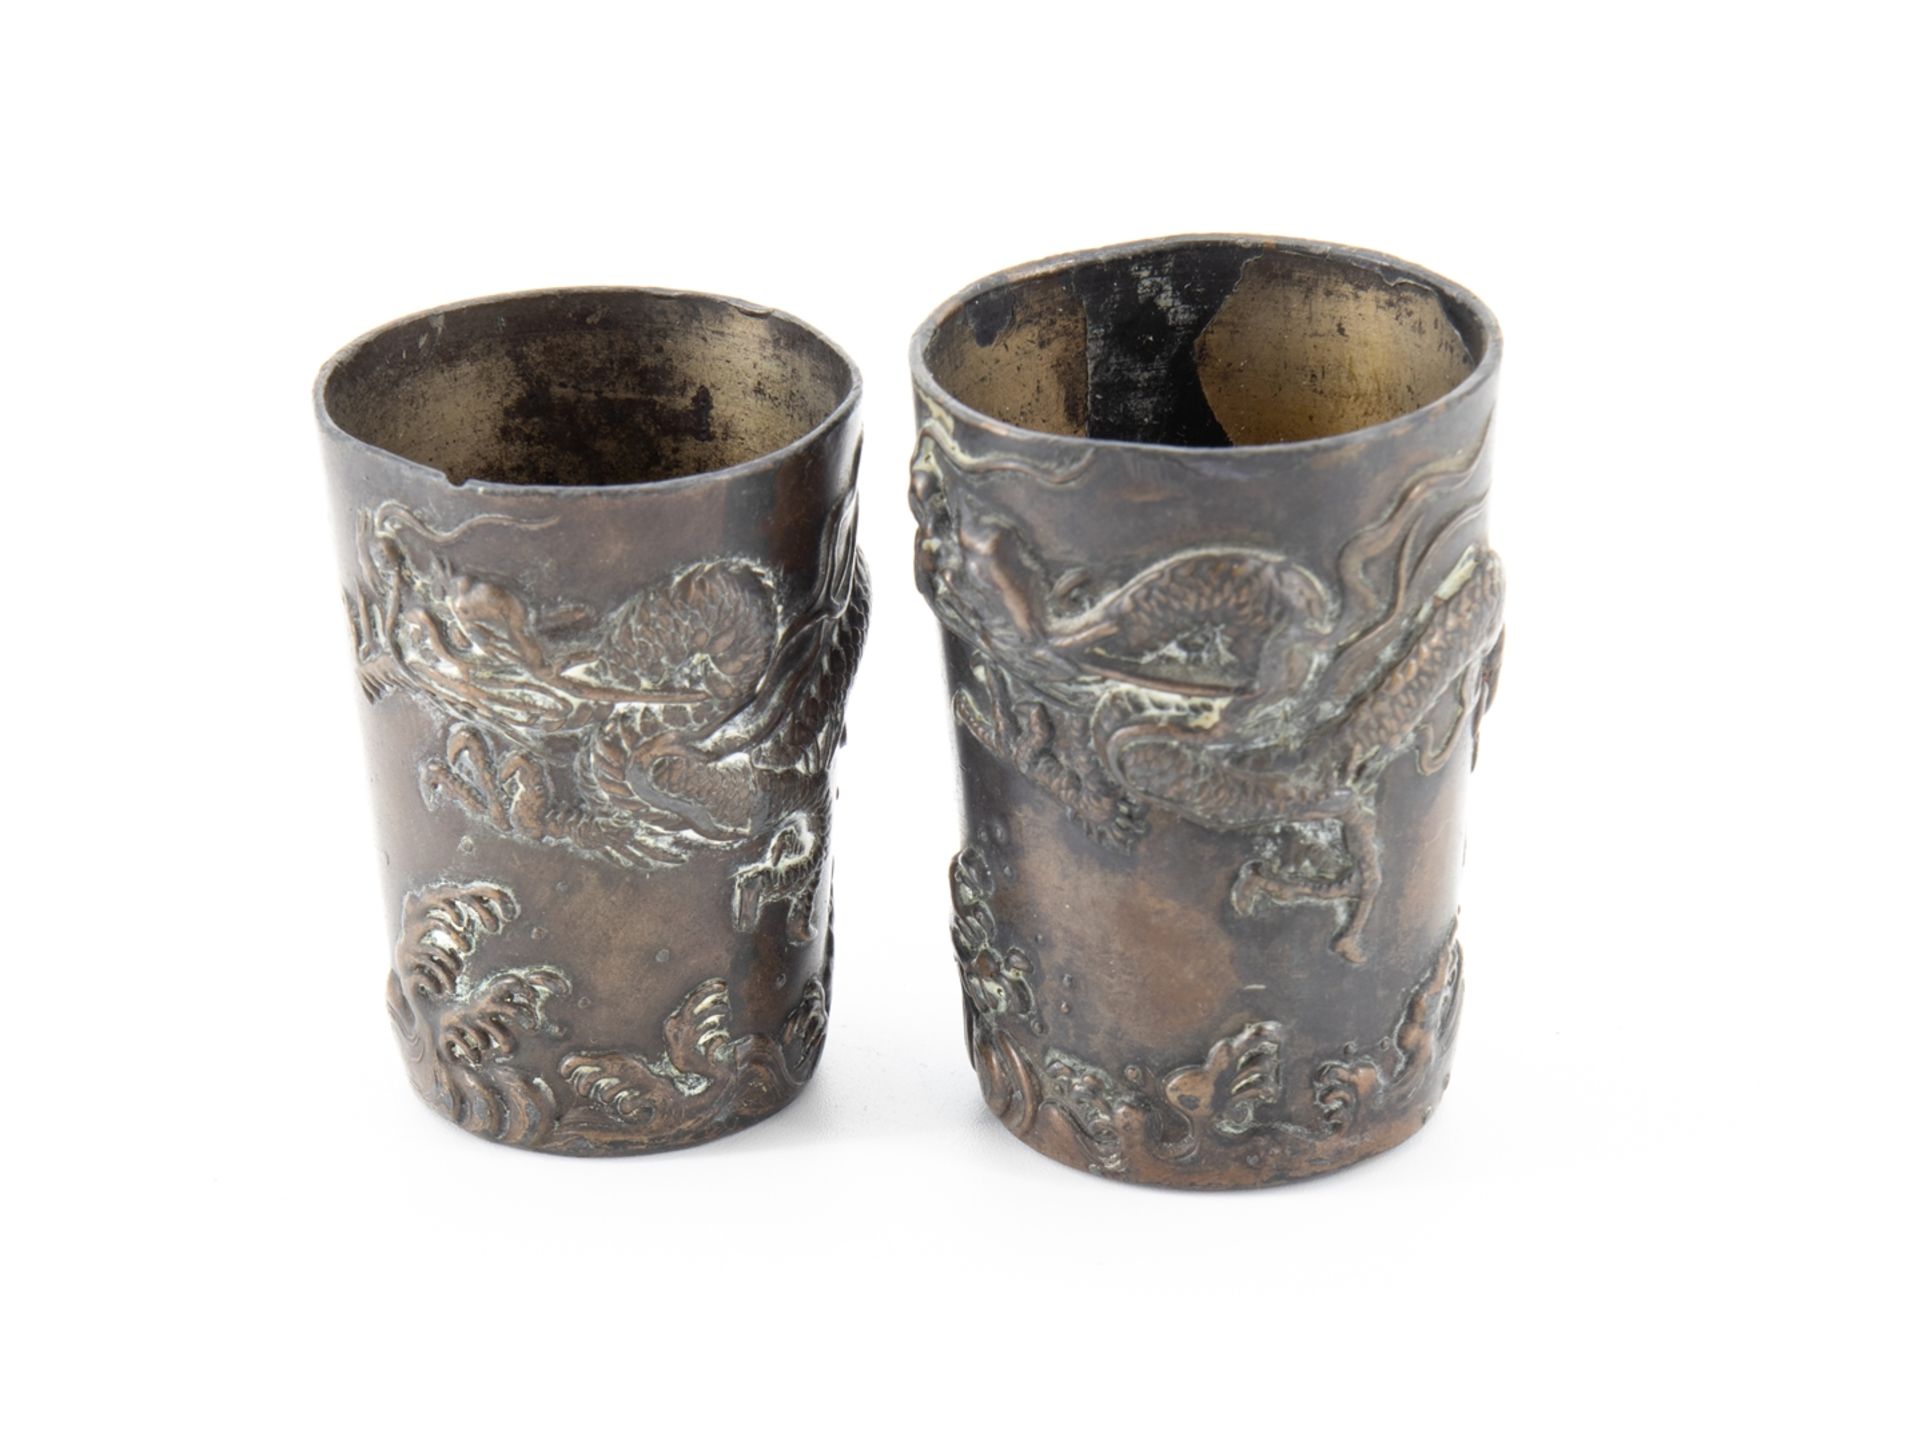 4 cups with dragon motif, China, around 1900 - Image 7 of 12